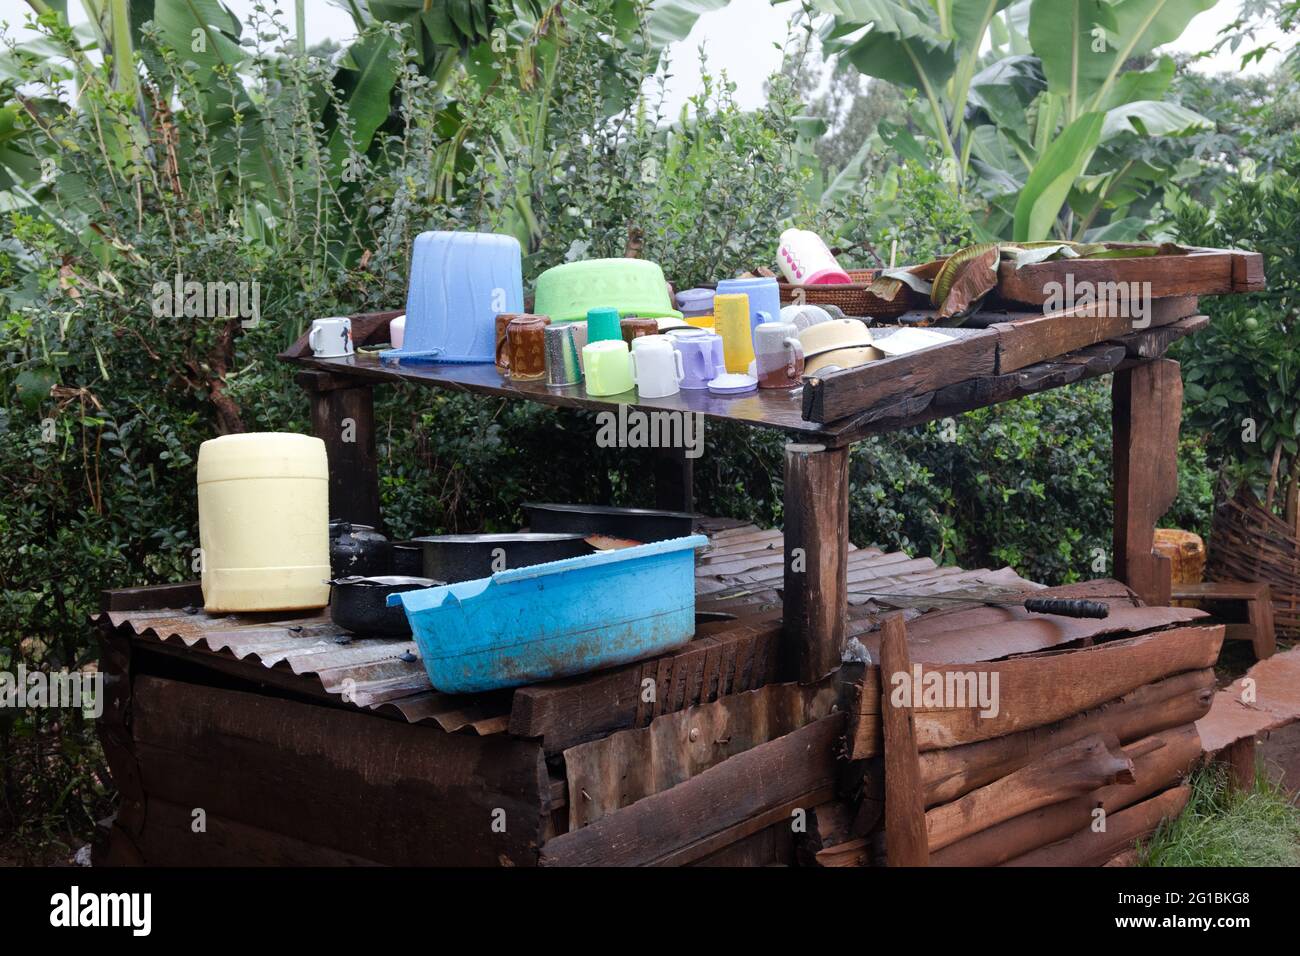 Cups, mugs, plates and bowls made of plastic and ceramic stand on a leaning wooden table with a wooden cabinet underneath in the open air Stock Photo